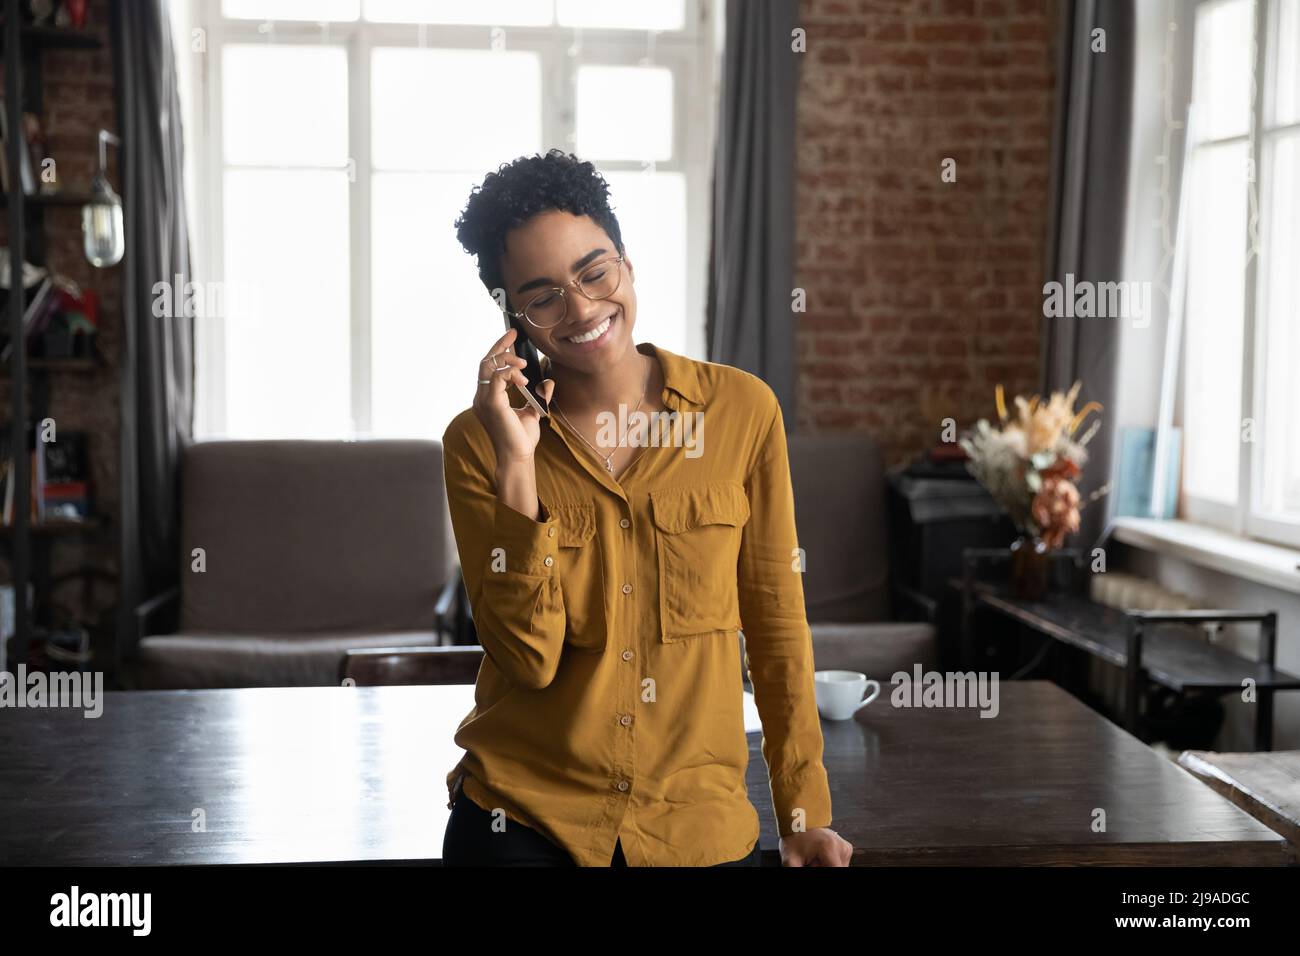 African woman standing indoor holds smartphone lead pleasant conversation Stock Photo